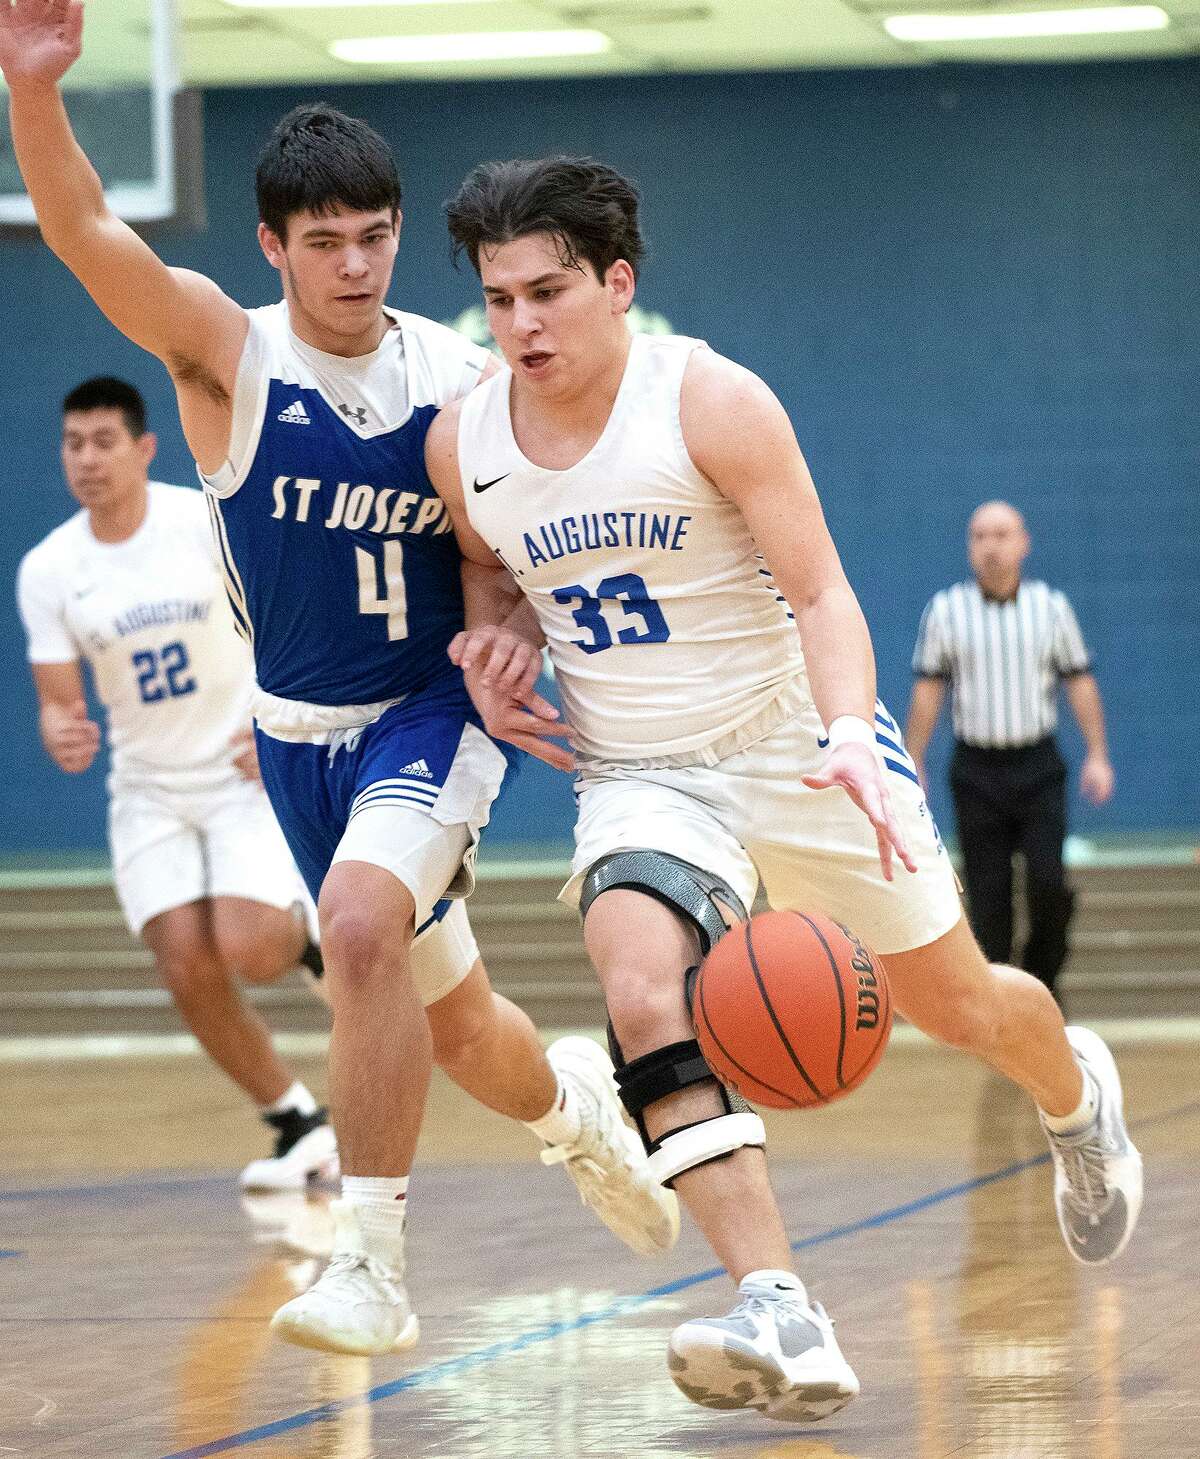 St. Augustine High School’s Esteban Barrientos moves the ball down the court during a game against St. Joseph High School Saturday, Jan. 15, 2022 at St. Augustine High School.